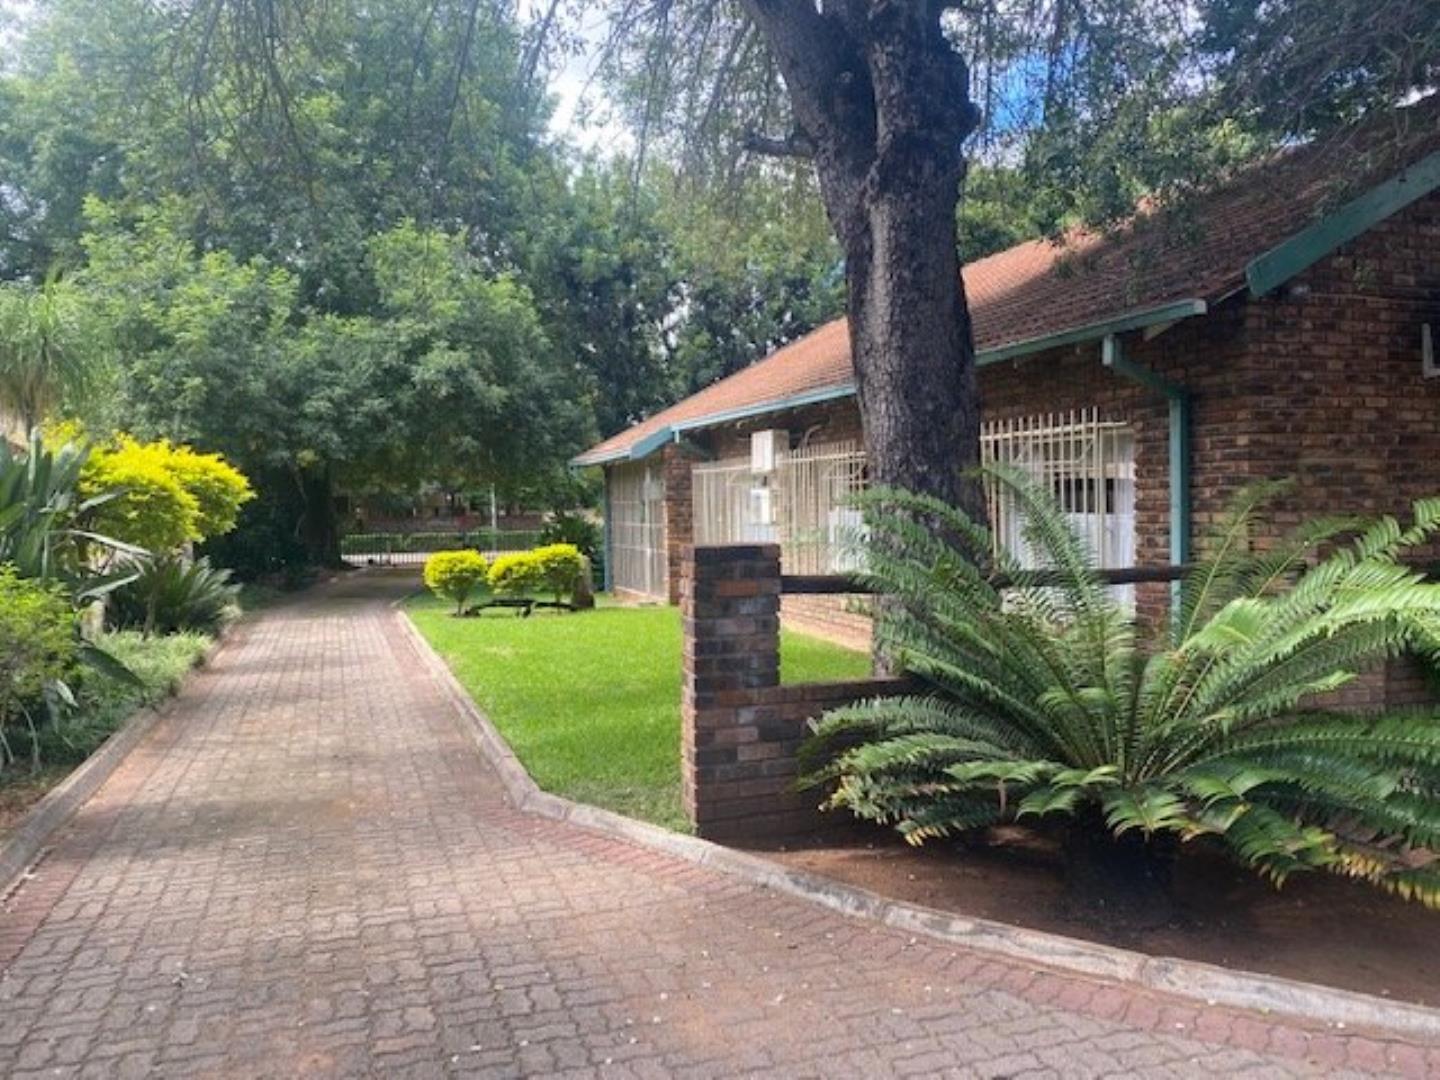 7 Bedroom House for Sale - Limpopo